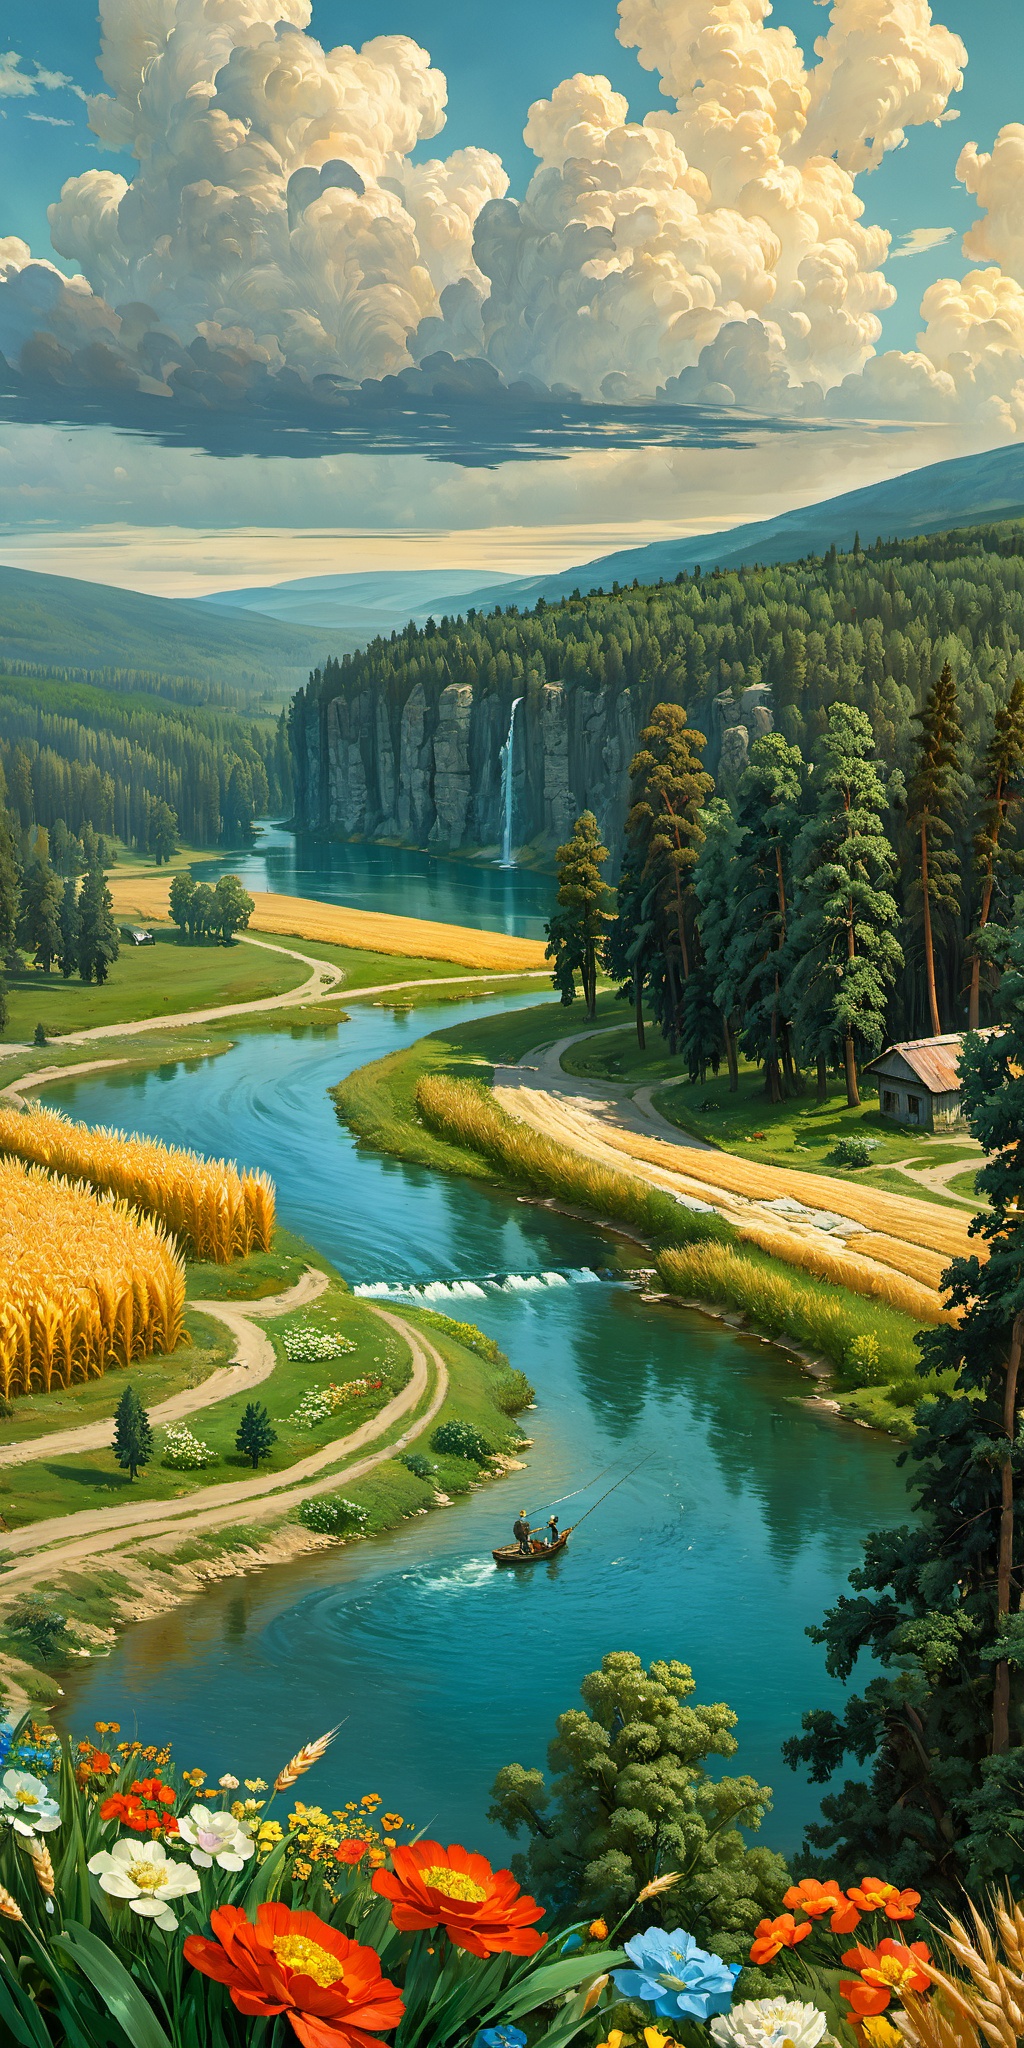 (Wheat), fields,ivan Shishkin,nature,trees,forest,water fall,sky,clouds,rock,lake,cloud,scenery,leafs,flowers,mountain at far,river,from above,countryside buildings at far,a man fishing beside river,